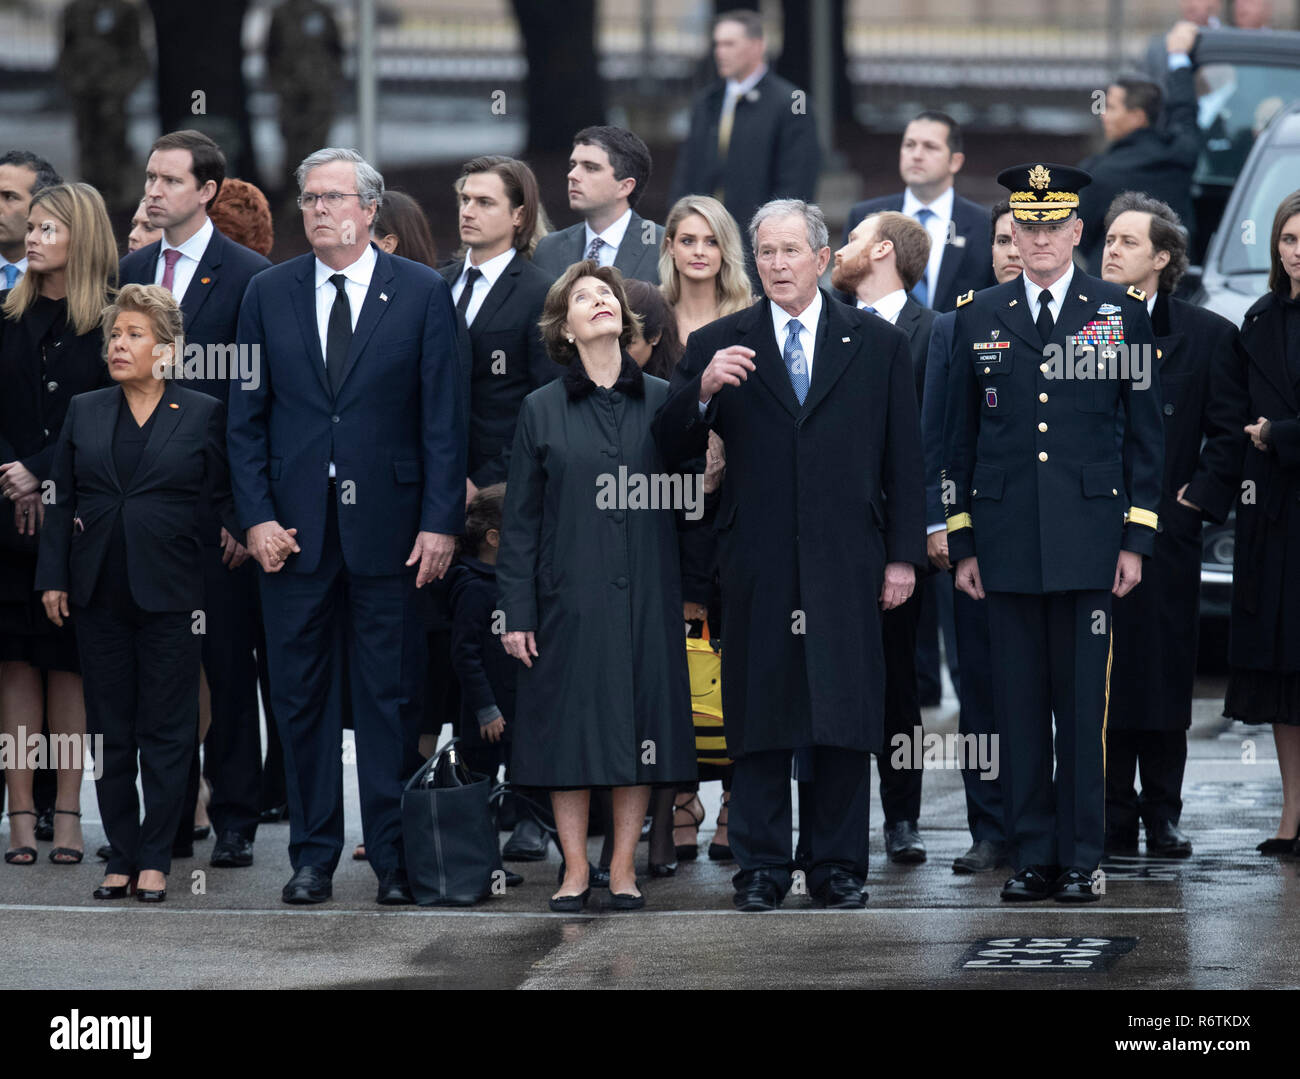 Former Pres. George W. Bush and wife Laur (center), Jeb Bush and wife Paloma (left) and other family members stand at attention as a military honor guard carries the casket of Bush's father, former President George H.W. Bush, to a hearse before burial at the nearby George Bush Library Stock Photo